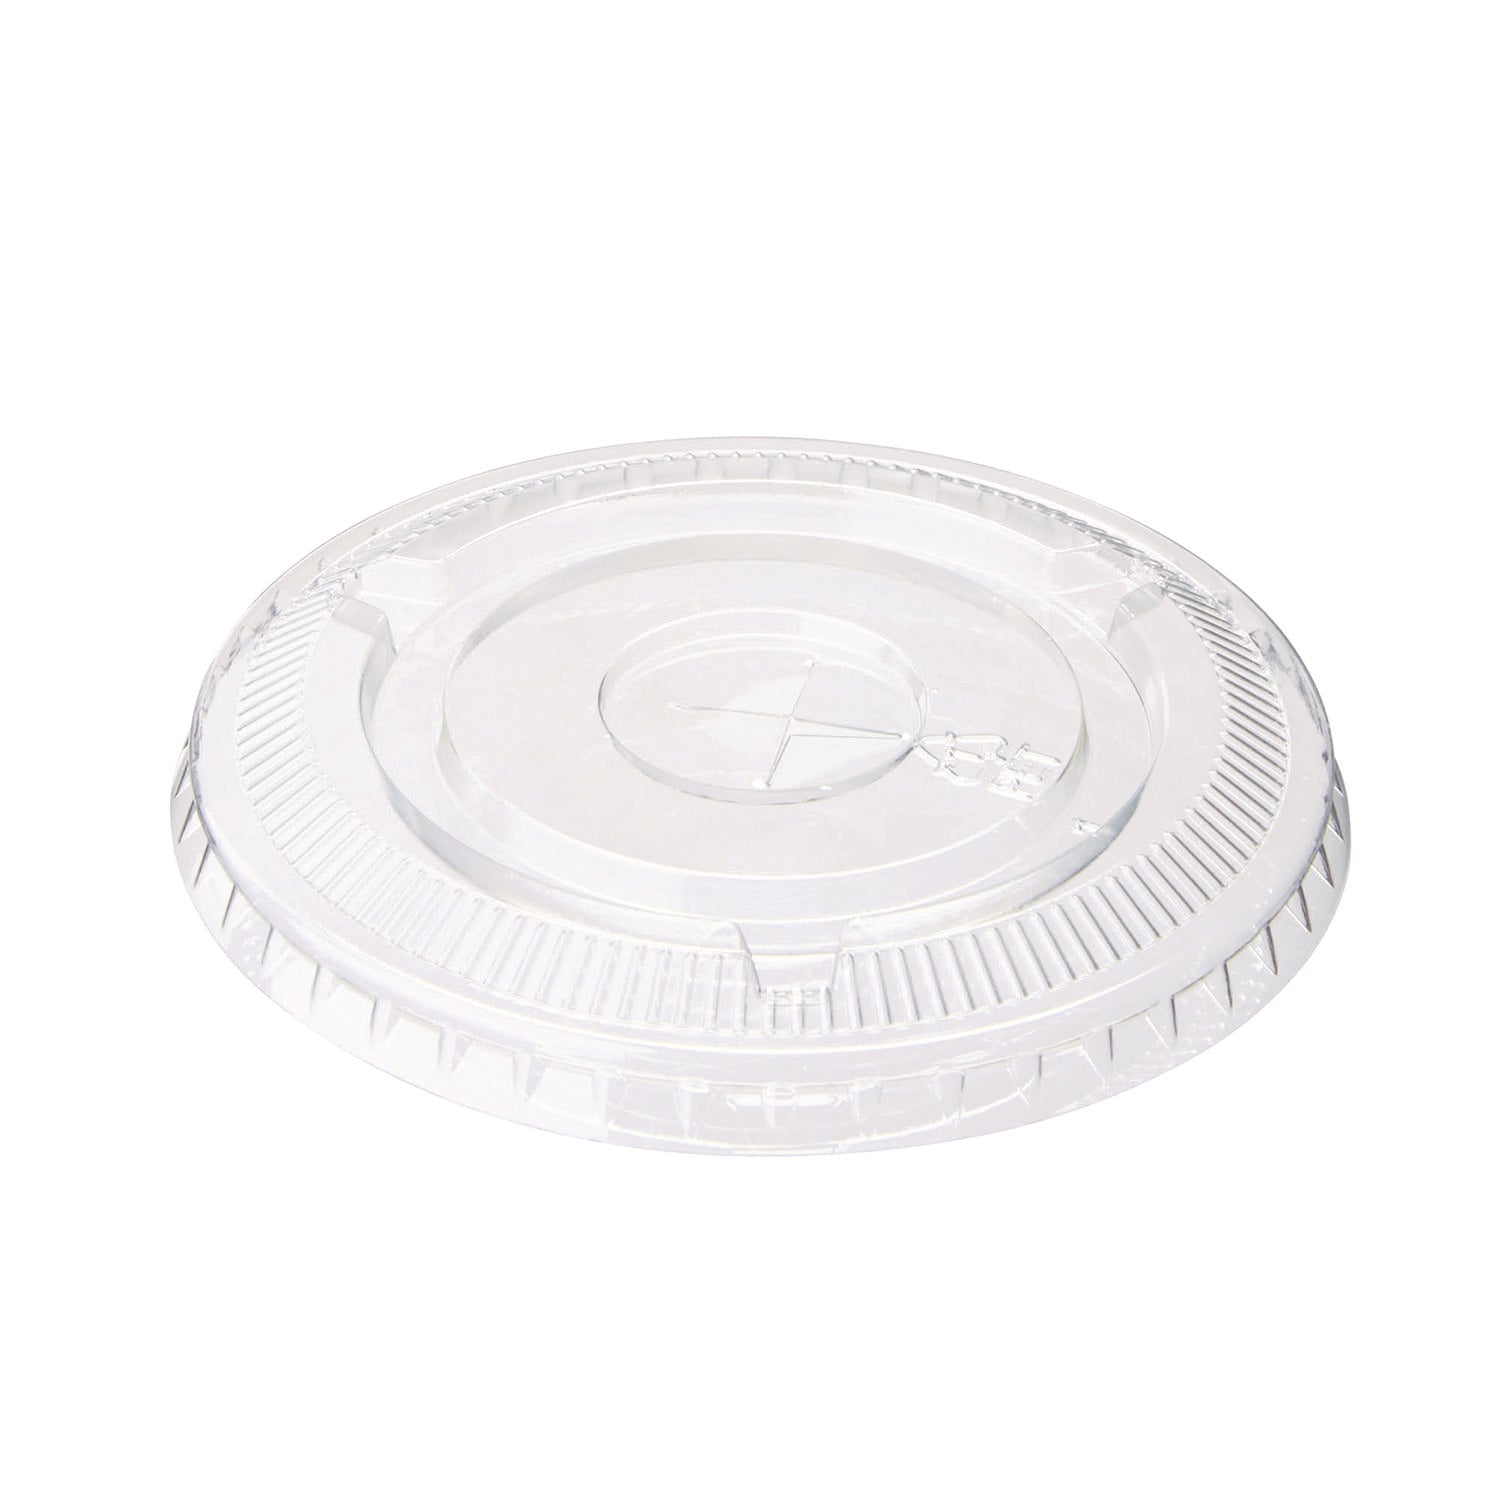 Cold Drink Cup Lids, Fits 9 oz to 12 oz Plastic Cold Cups, Clear, 100/Sleeve, 10 Sleeves/Carton - 1